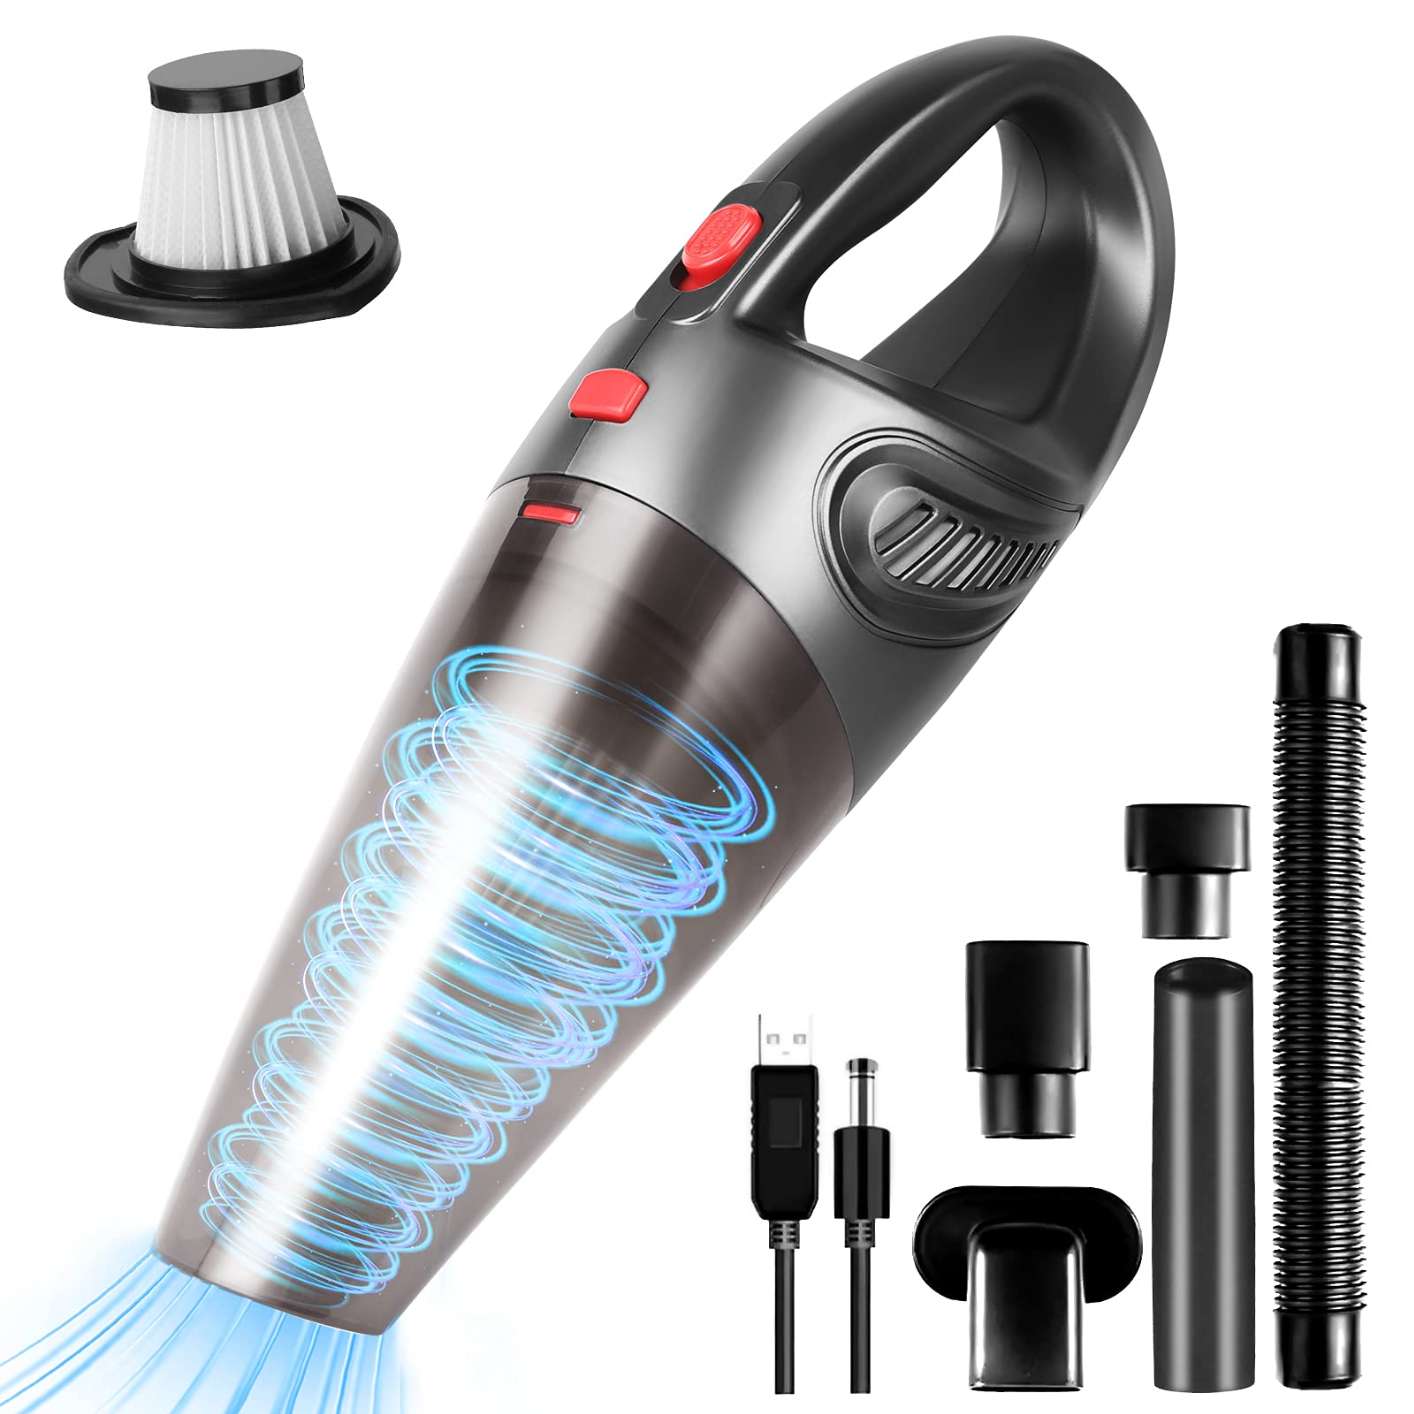 MECOLA Handheld Vacuums Cordless, 8500PA Portable Handheld Hoover, 120W USB Rechargeable Car Vacuum Cleaner for Home Pet Office Car, Powerful Suction, 3H Fast Charging, Working 35Min